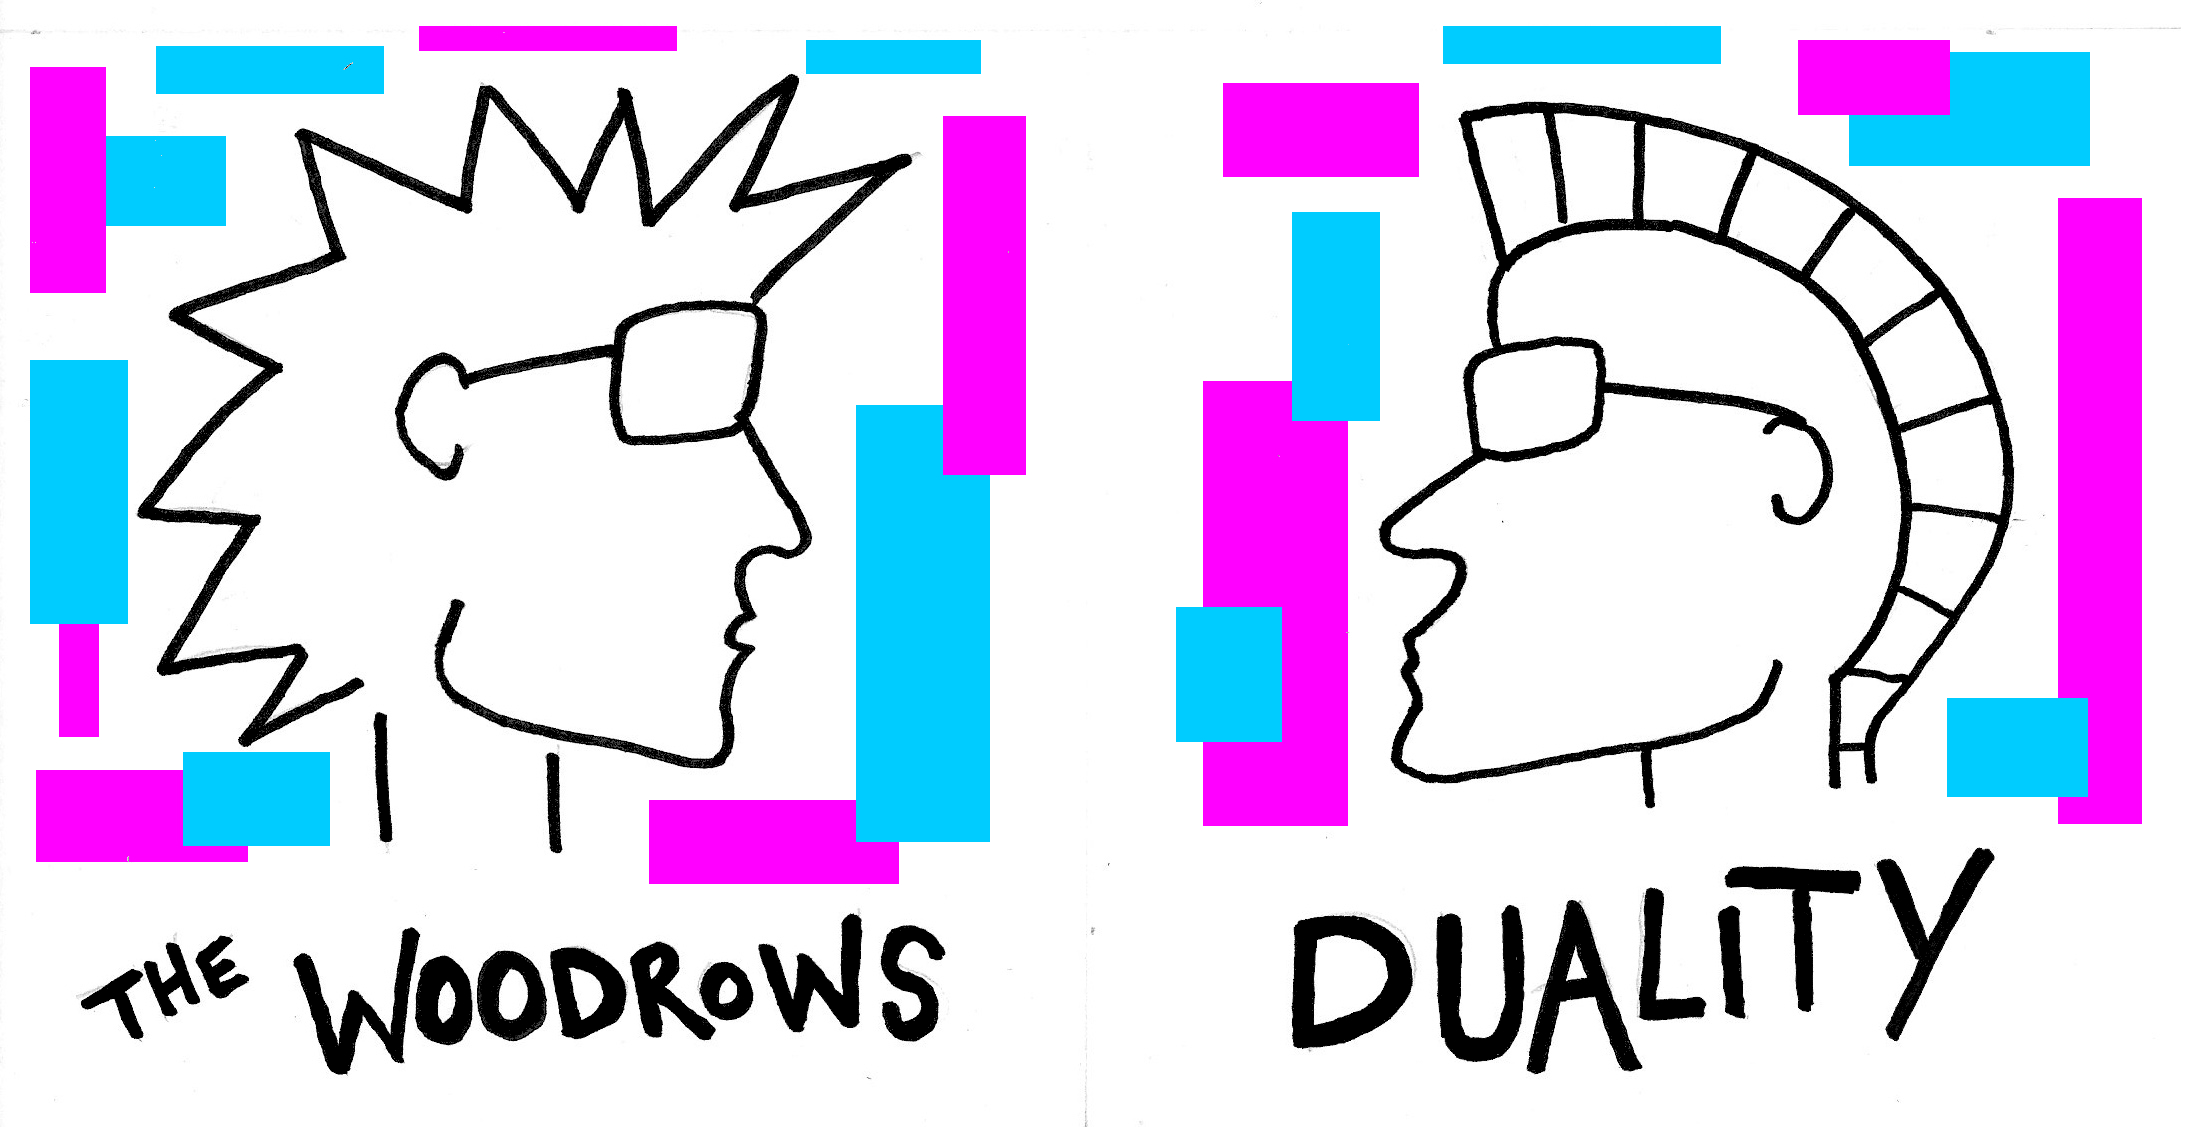 The Woodrows Duality